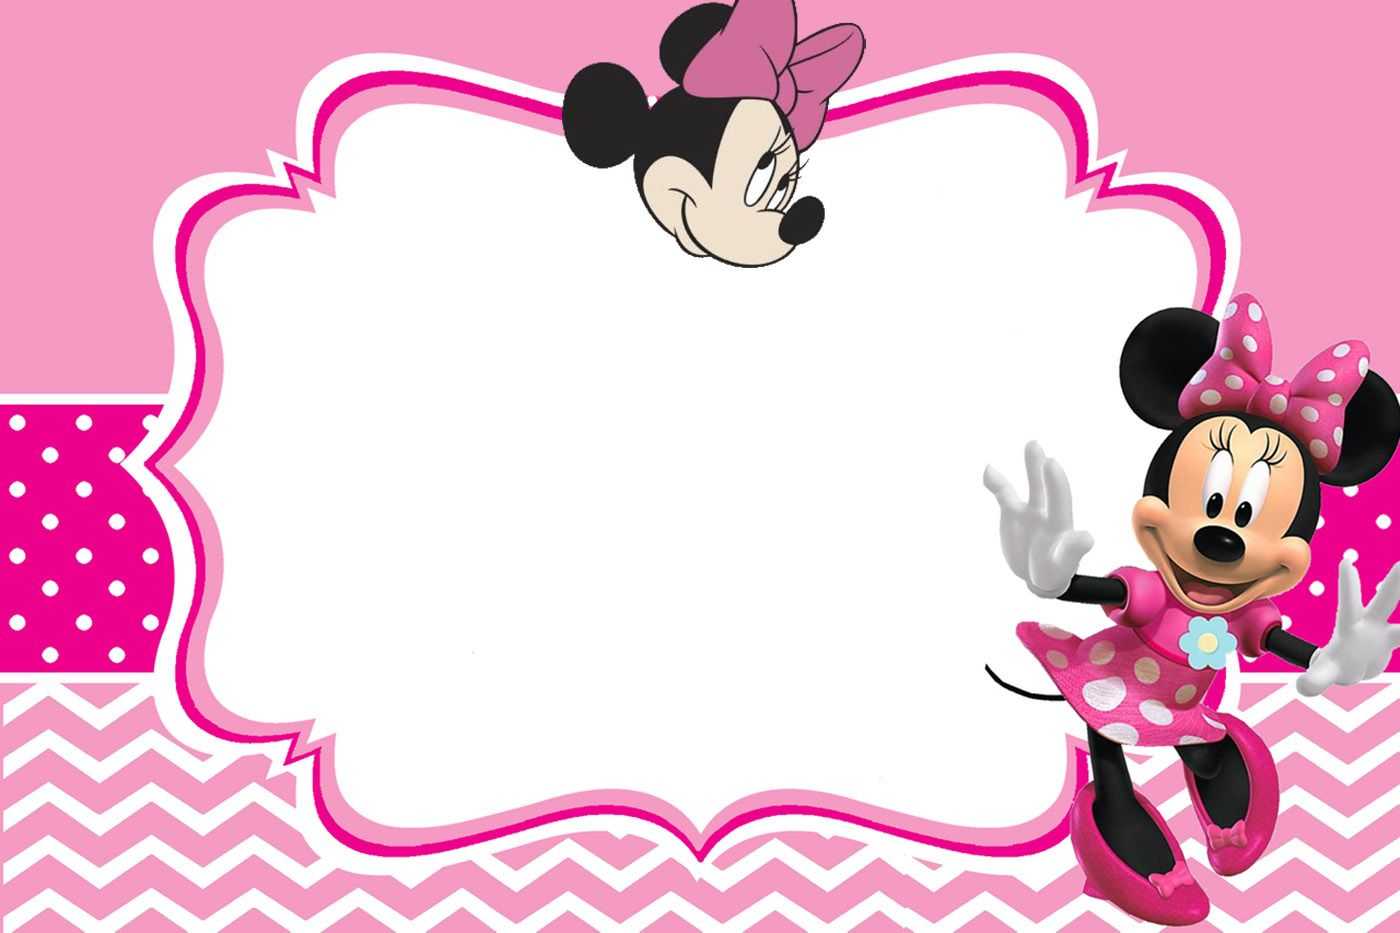 Minnie Mouse Invitation Card Design | Mickey Mouse With Minnie Mouse Card Templates